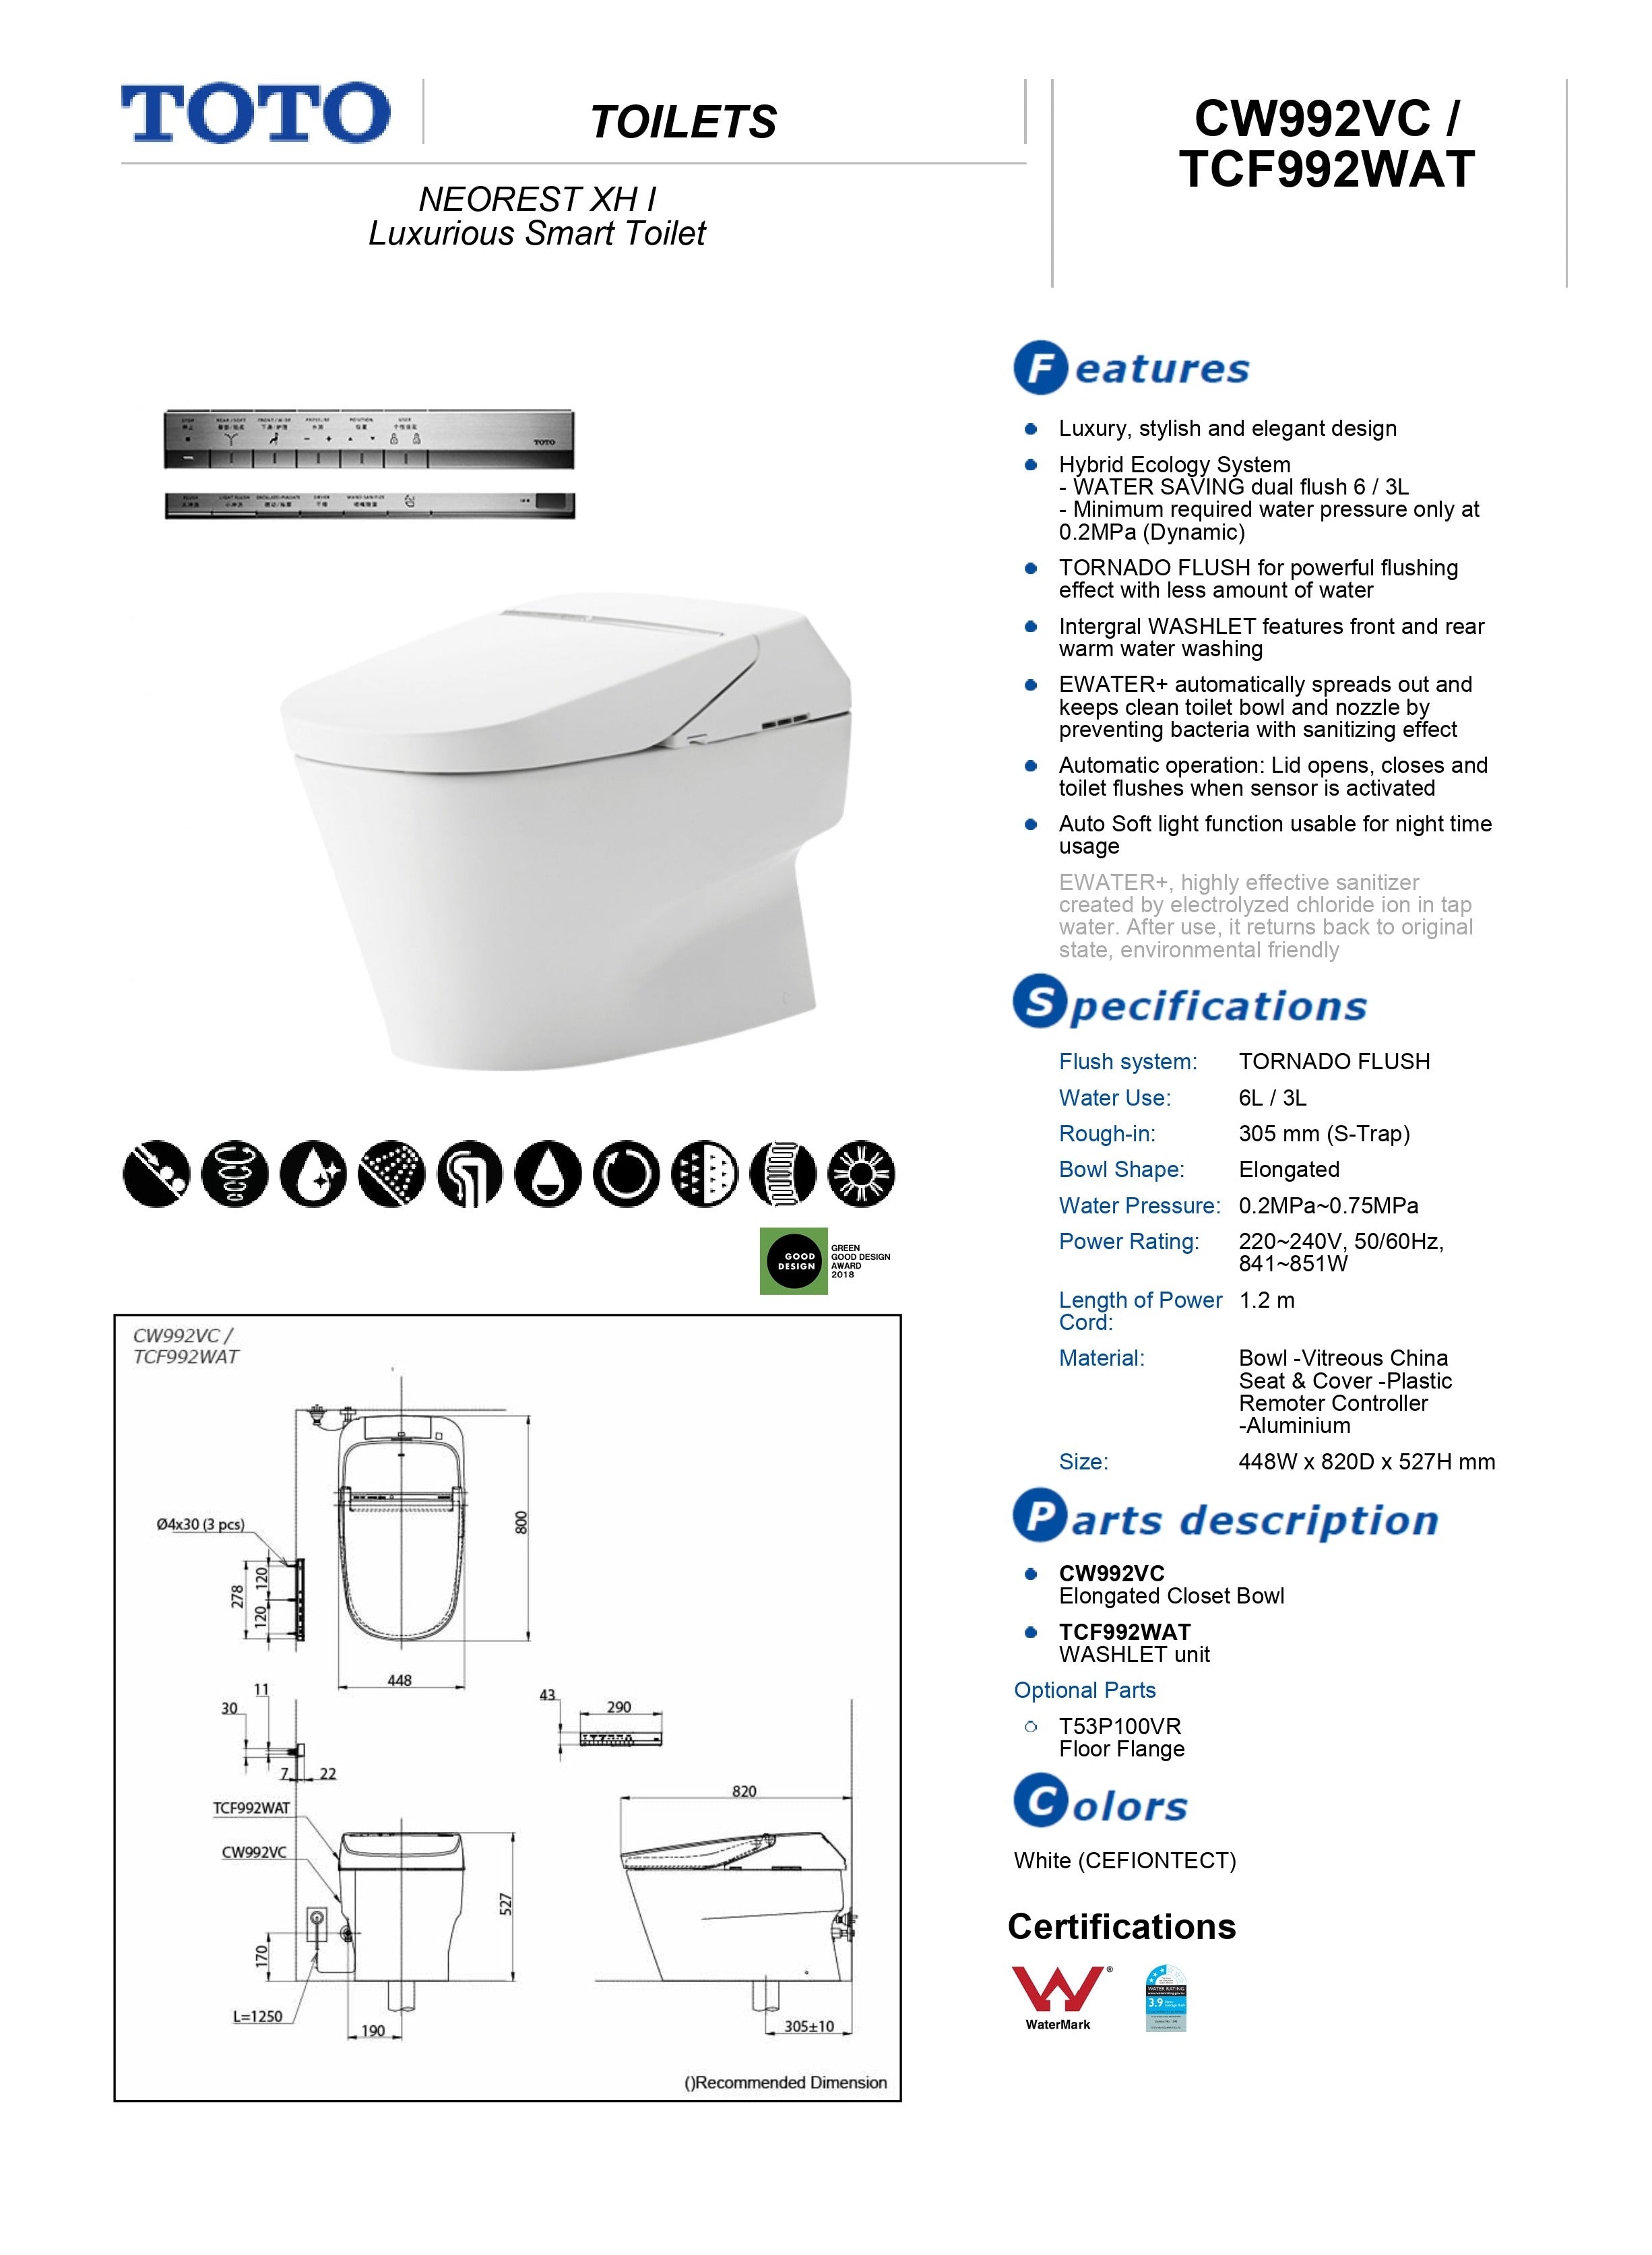 TOTO NEOREST XH I LUXURIOUS SMART TOILET W/ REMOTE CONTROL PACKAGE GLOSS WHITE